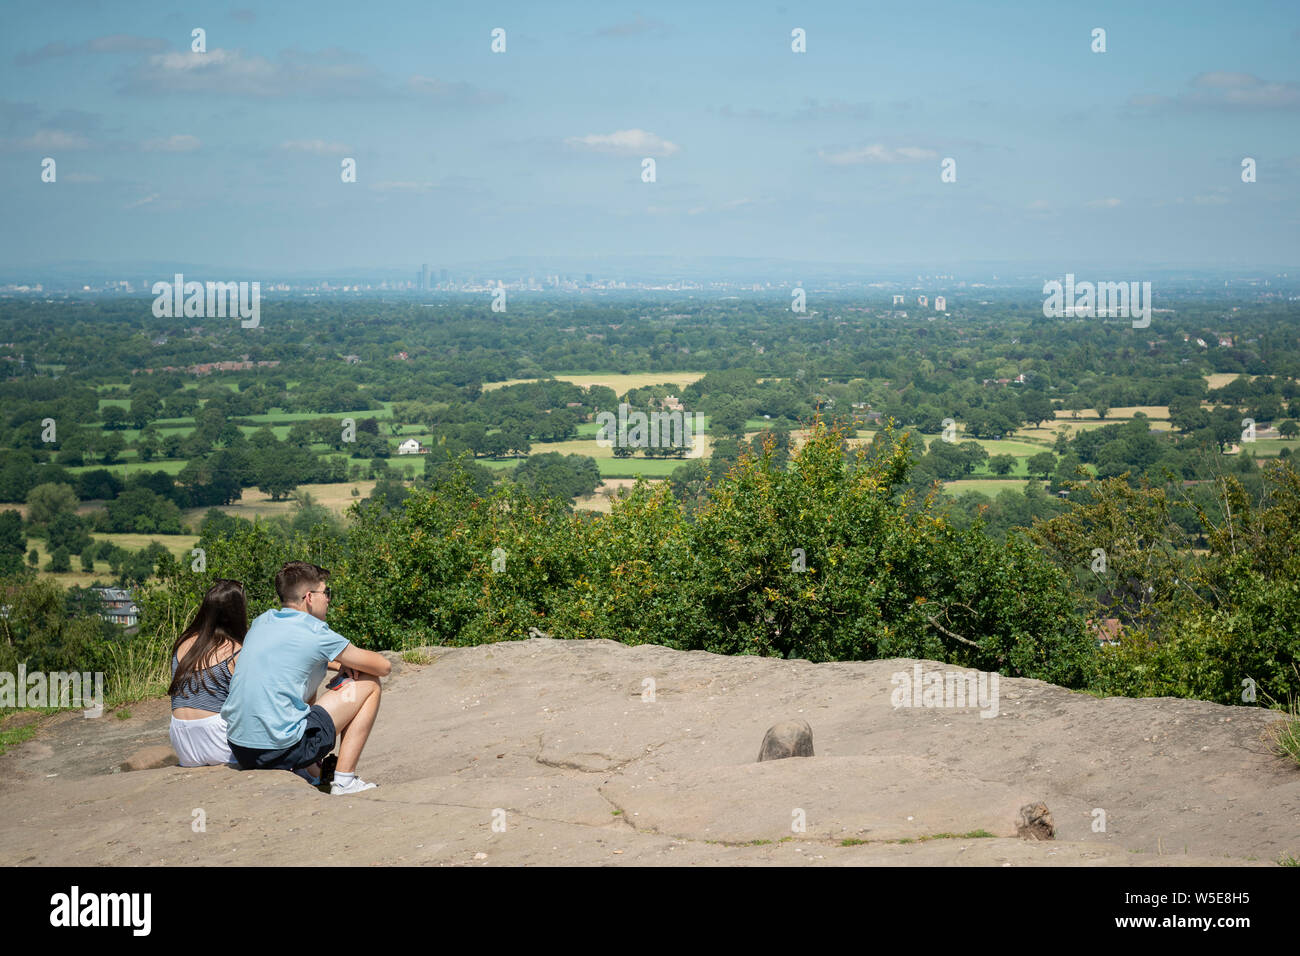 The lookout at Alderley Edge in Cheshire, UK. Stock Photo